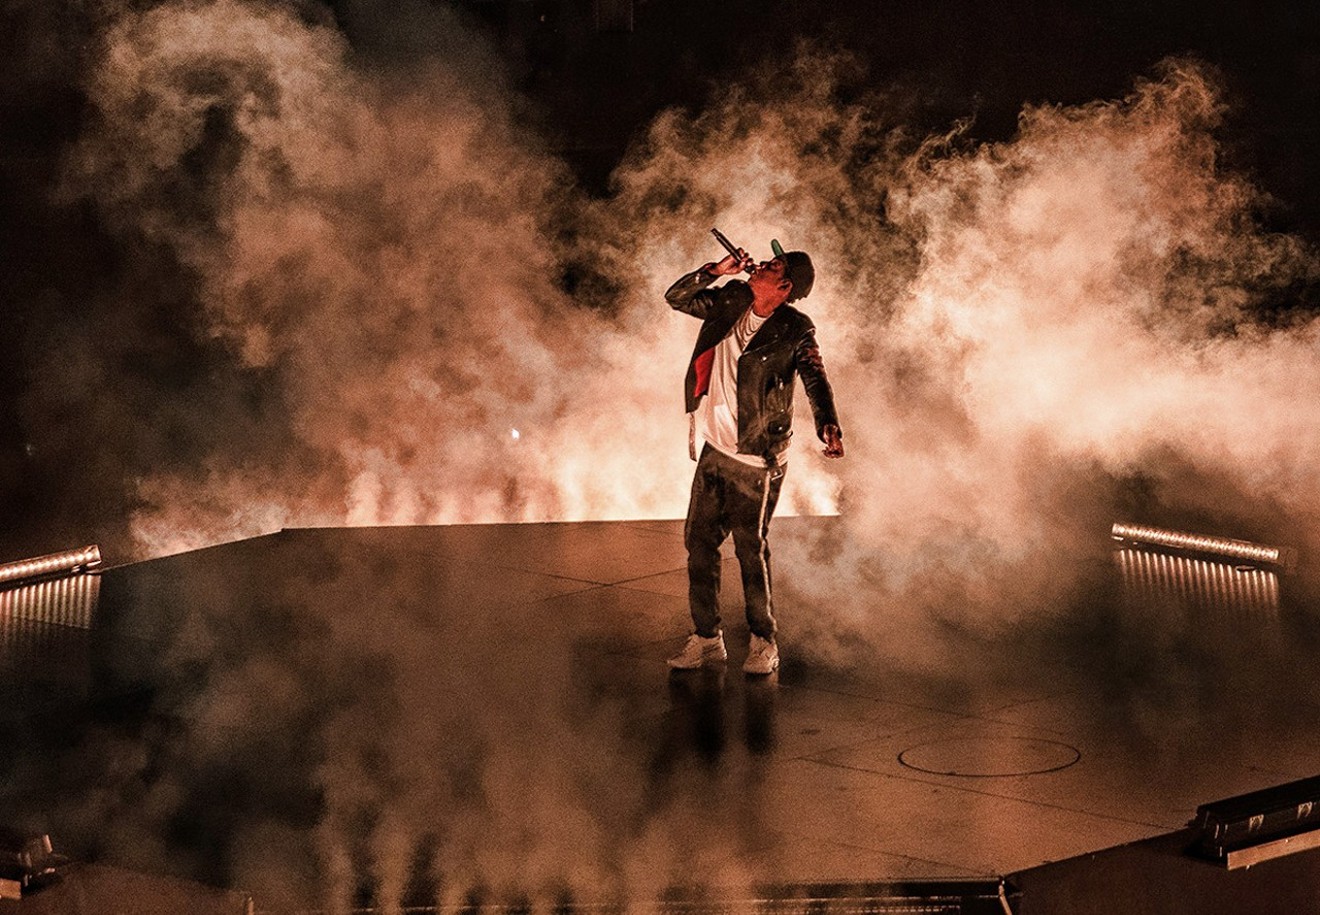 See more photos of Jay-Z at the American Airlines Arena here.